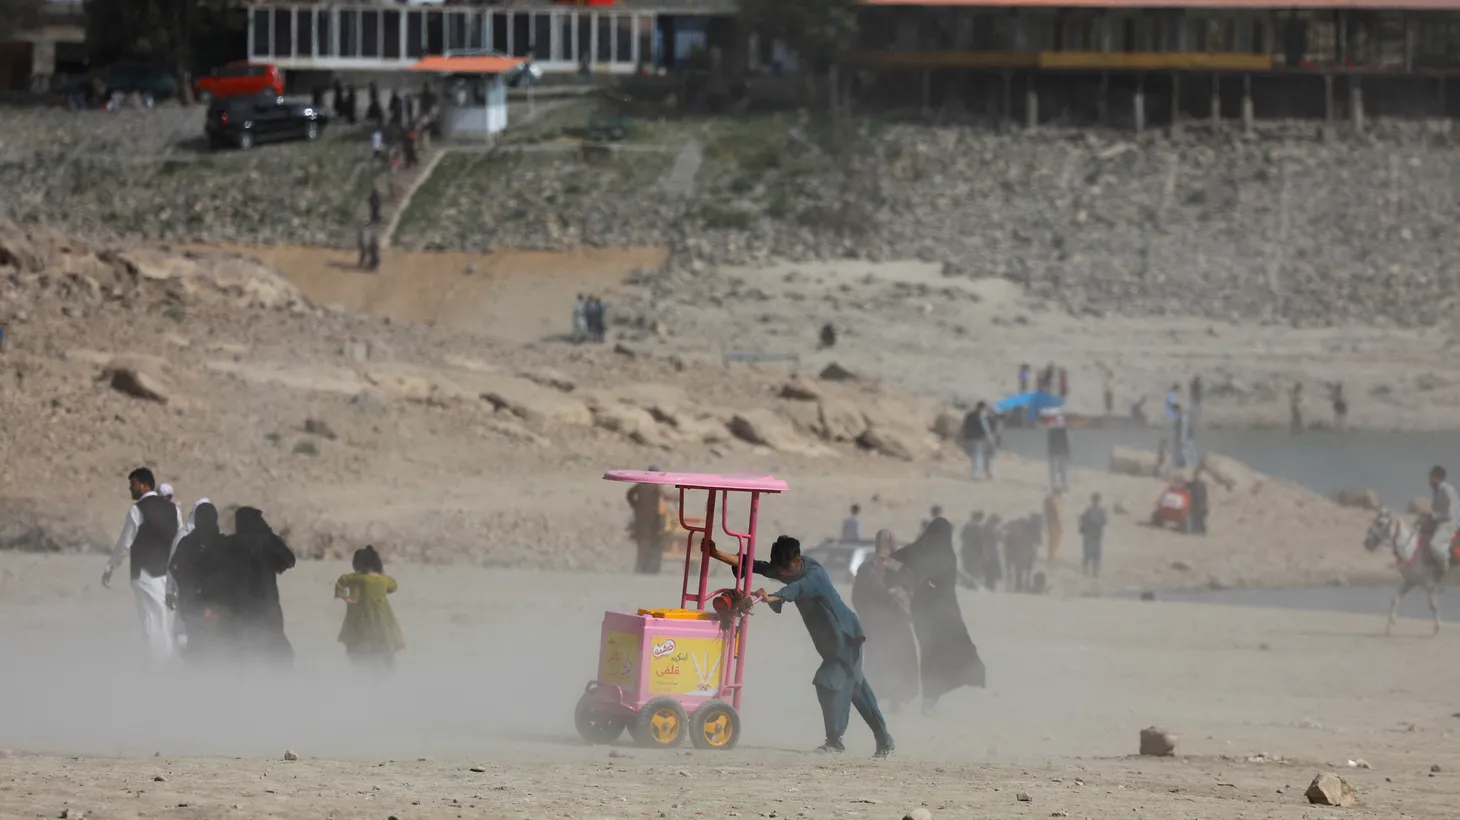 A person pushes a cart during a dust storm in Qargha lake in Kabul, Afghanistan, July 29, 2022.